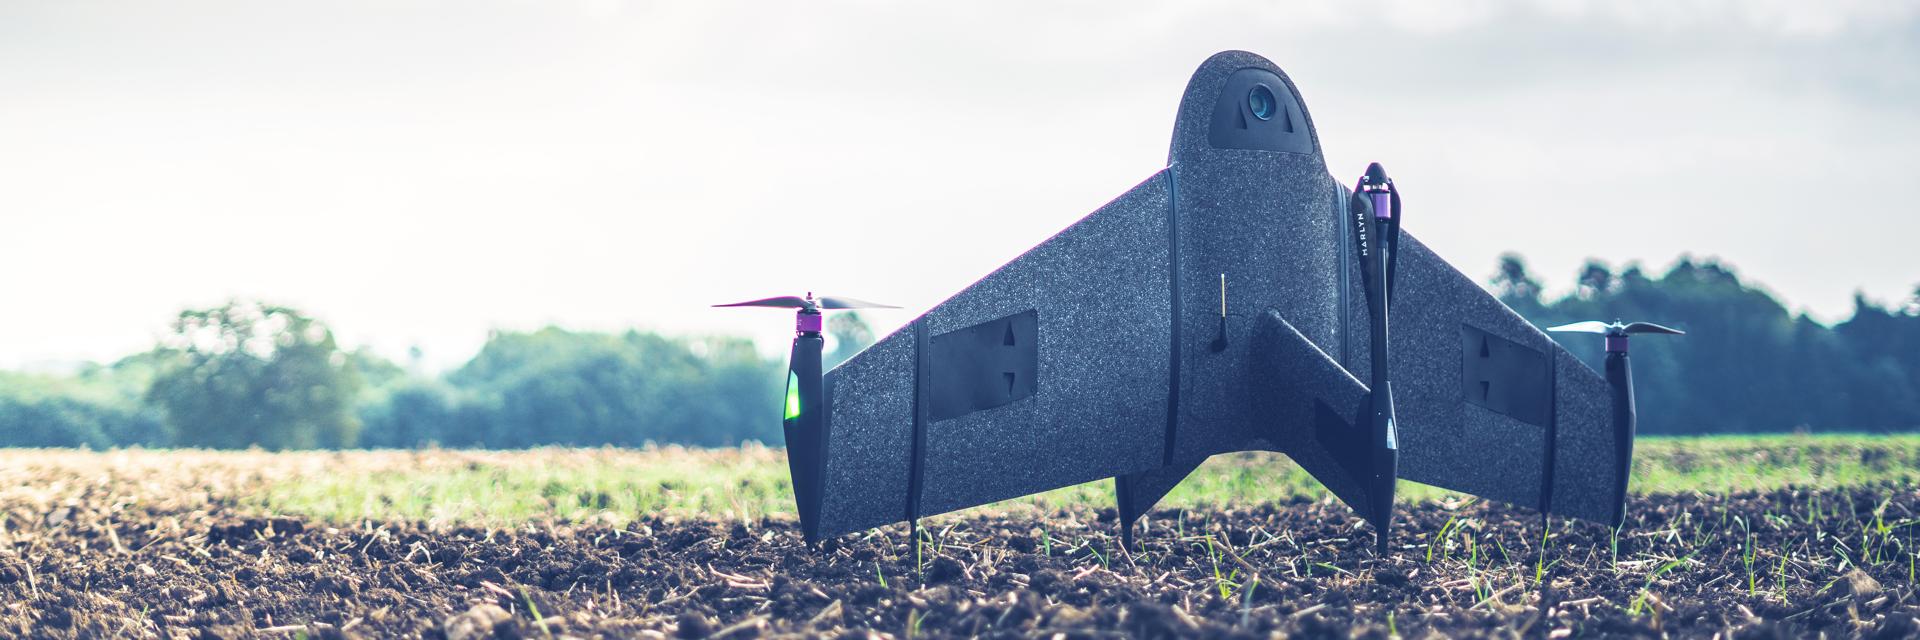 A 3D-printed surveying drone stands upright on a muddy field.